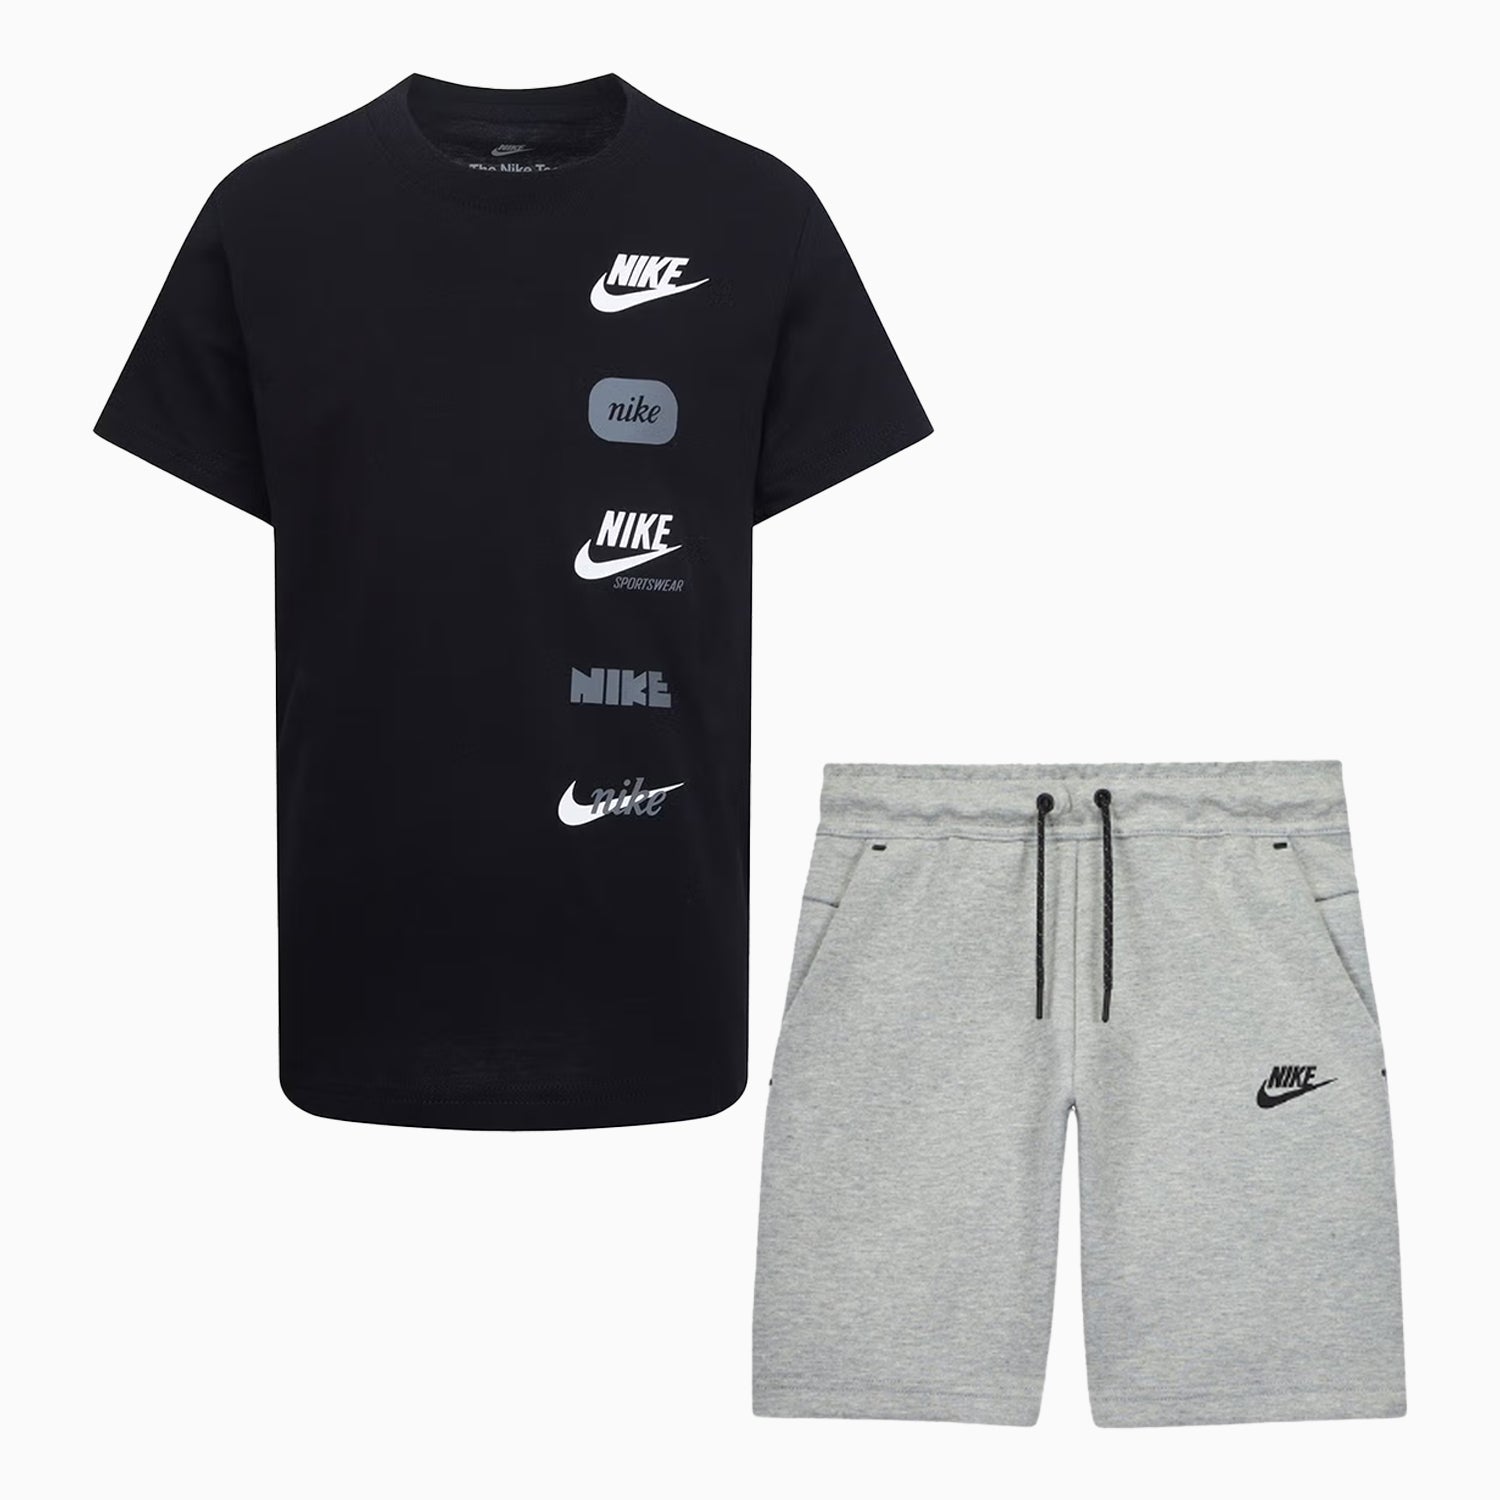 nike-kids-sportswear-t-shirt-and-shorts-outfit-86l881-023-86h593-042